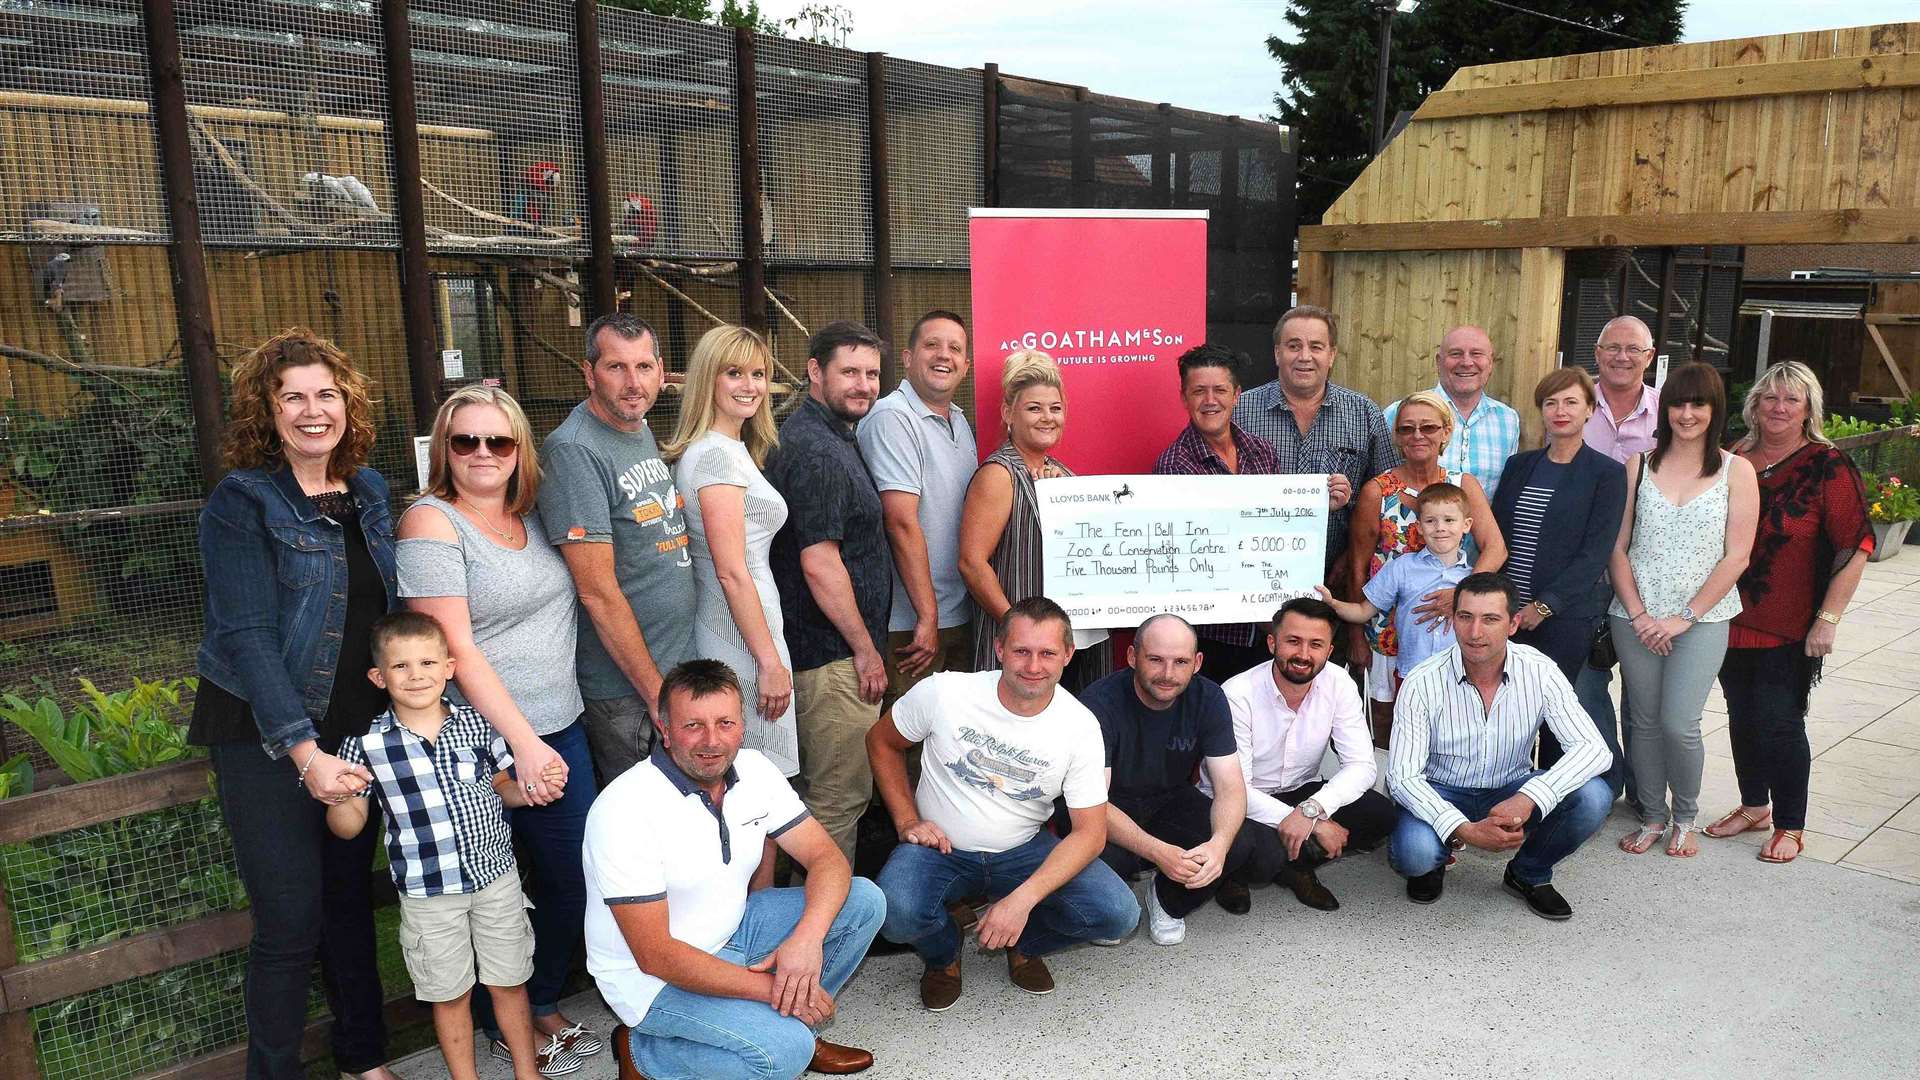 Staff from AC Goatham and Son presenting the £5,000 cheque to Fenn Bell Inn landlords Andy and Kelly Cowell